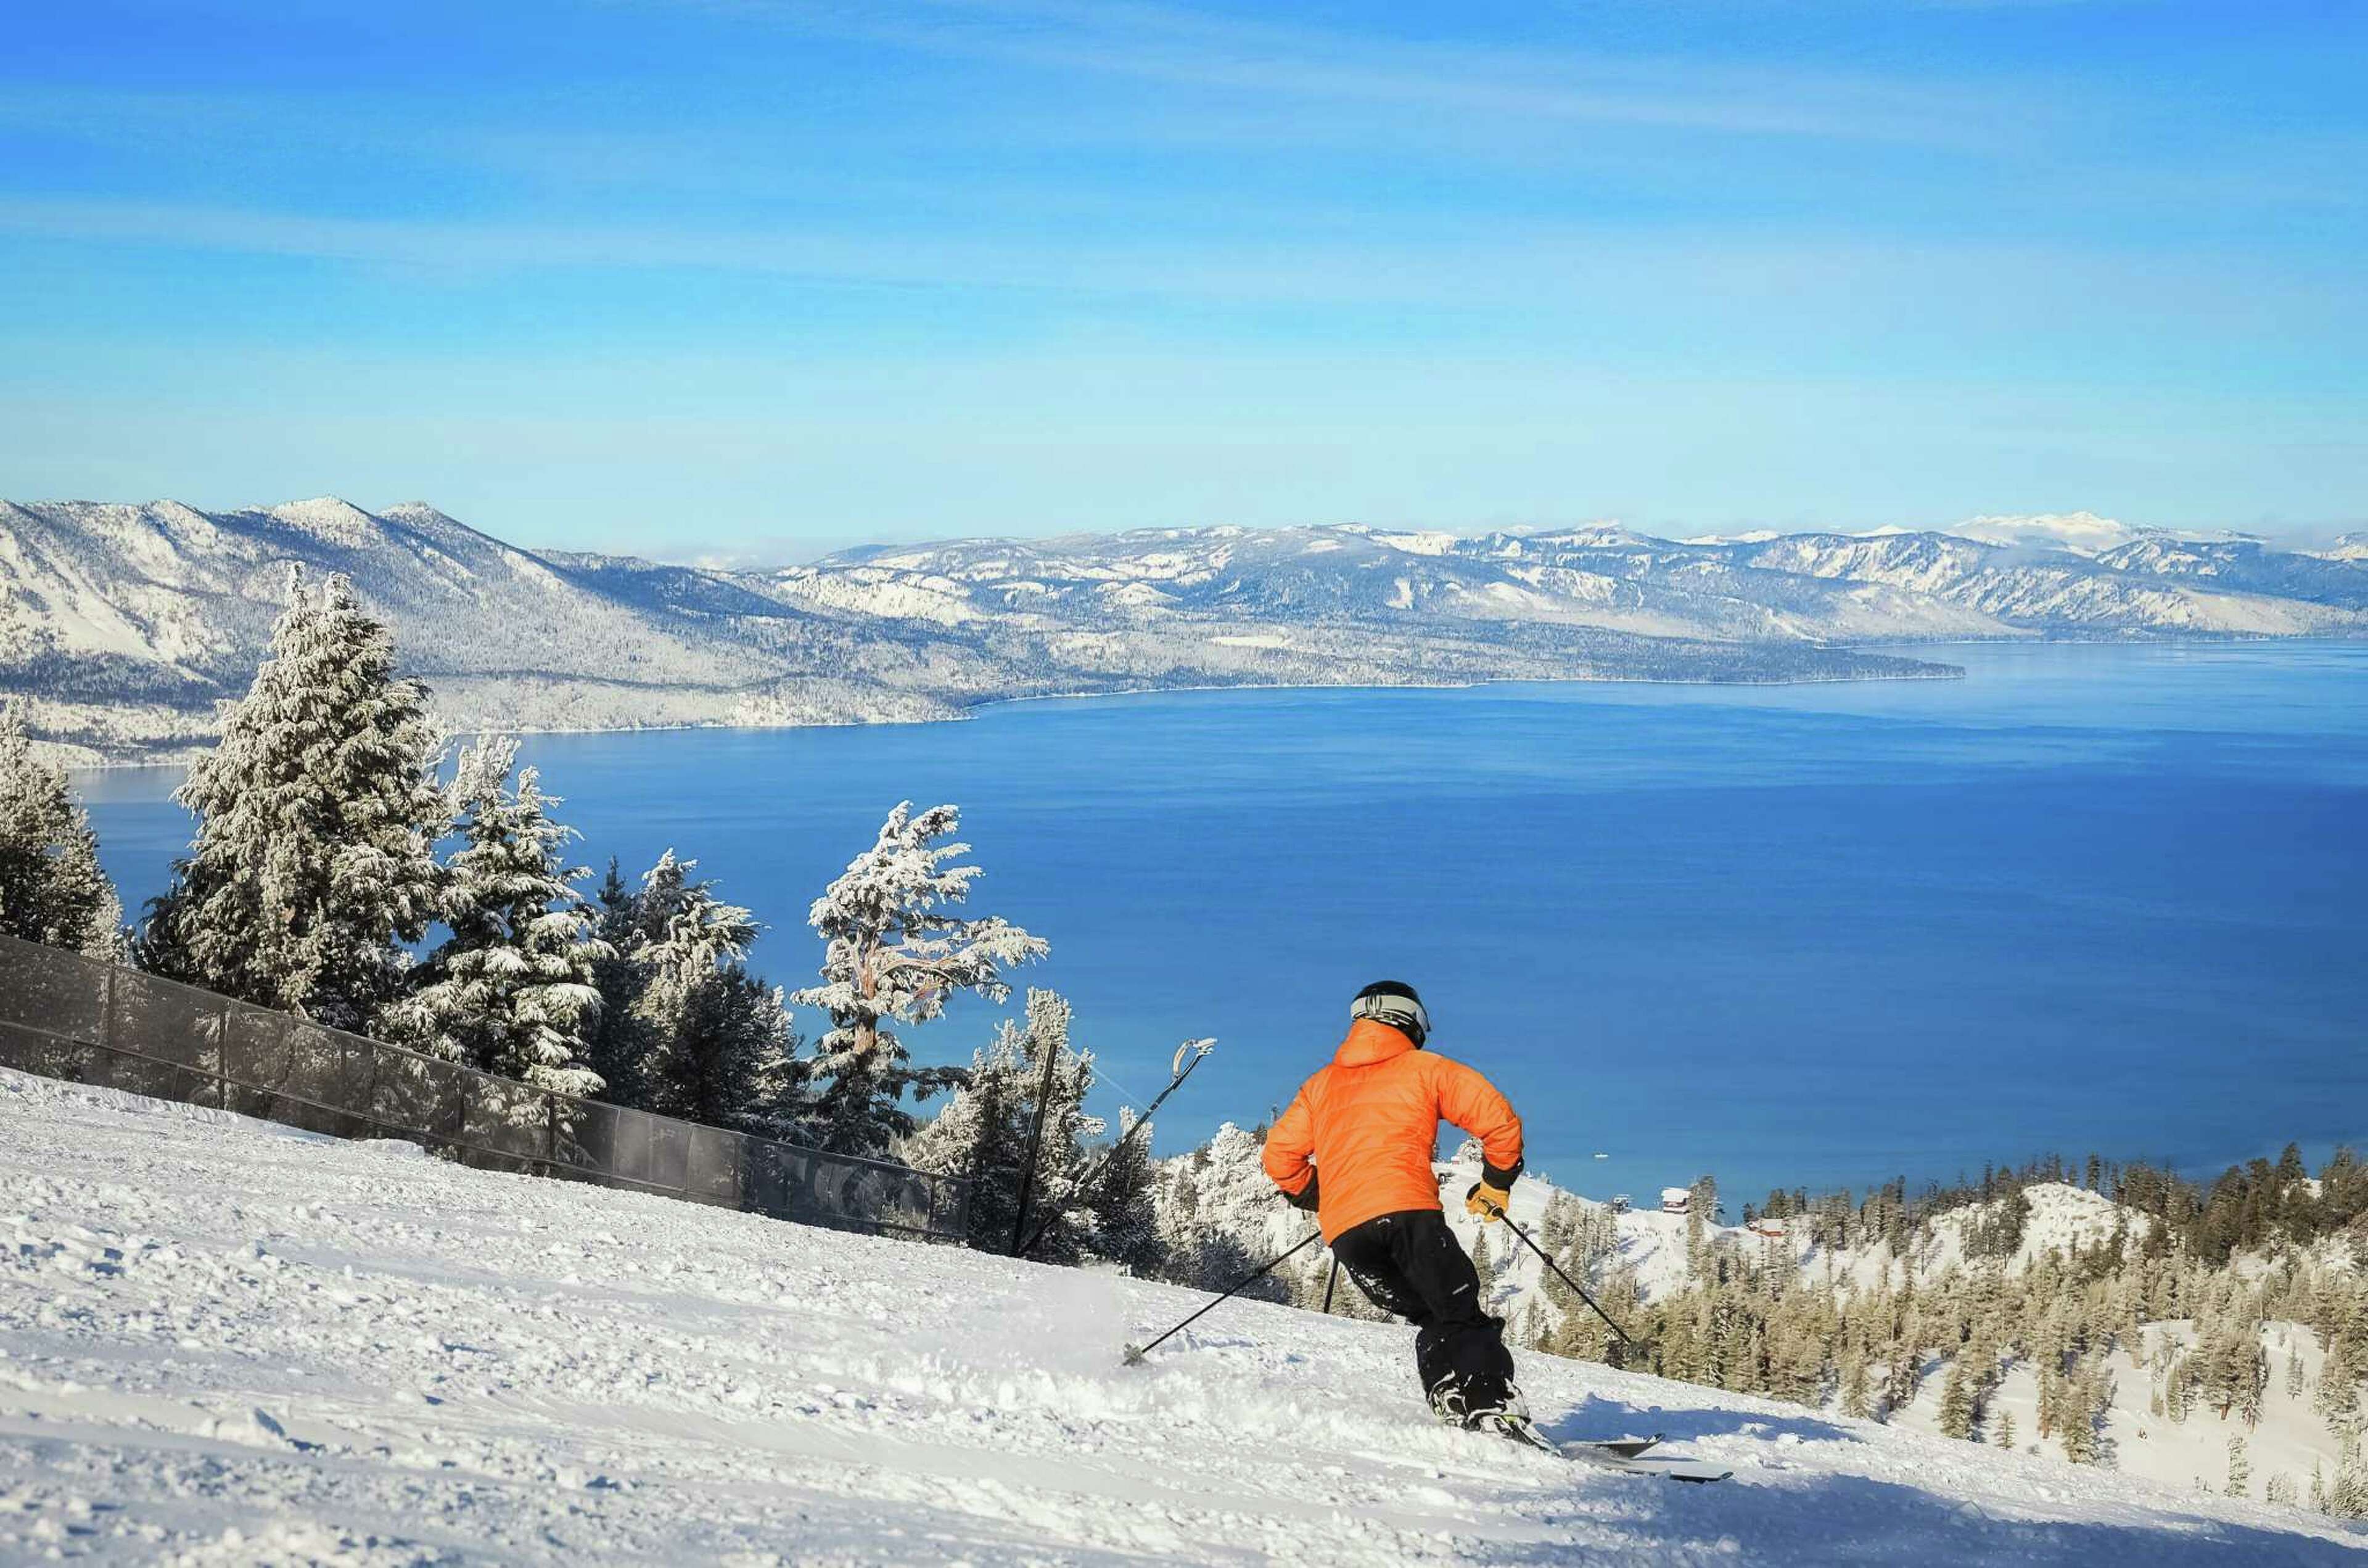 Skiing in Lake Tahoe Everything you need to know about 10 major ski